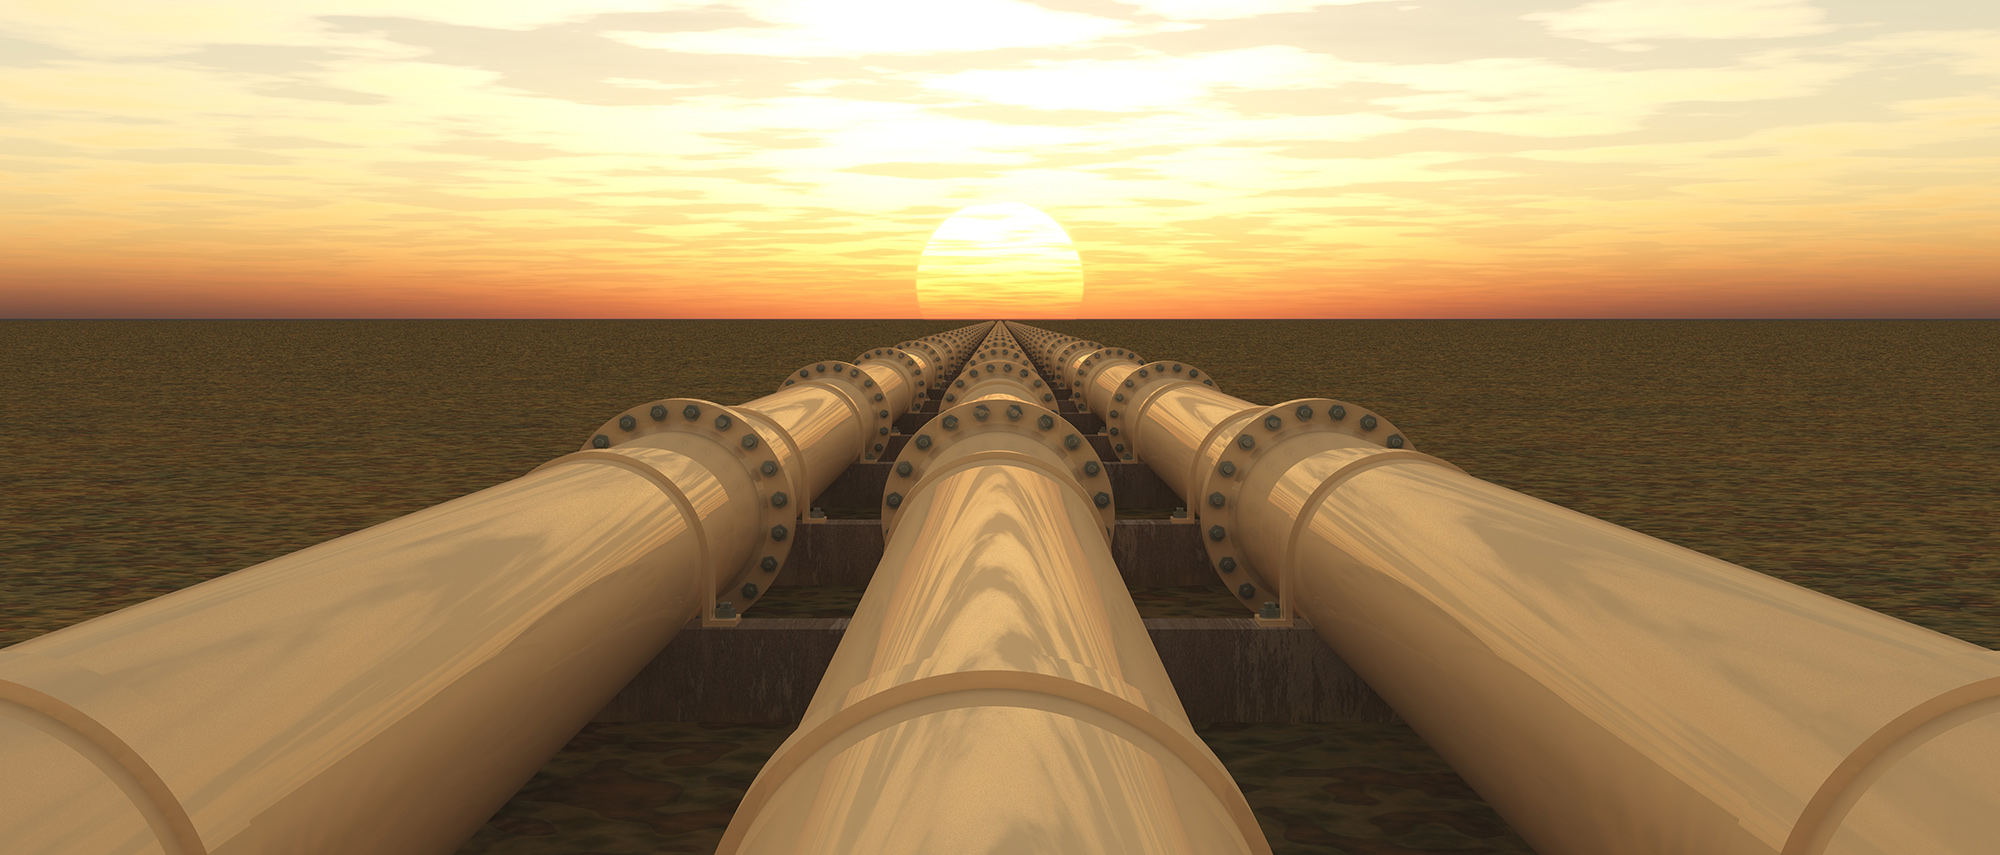 Short-term growth for onshore pipeline installation activity, with stable long-term prospects